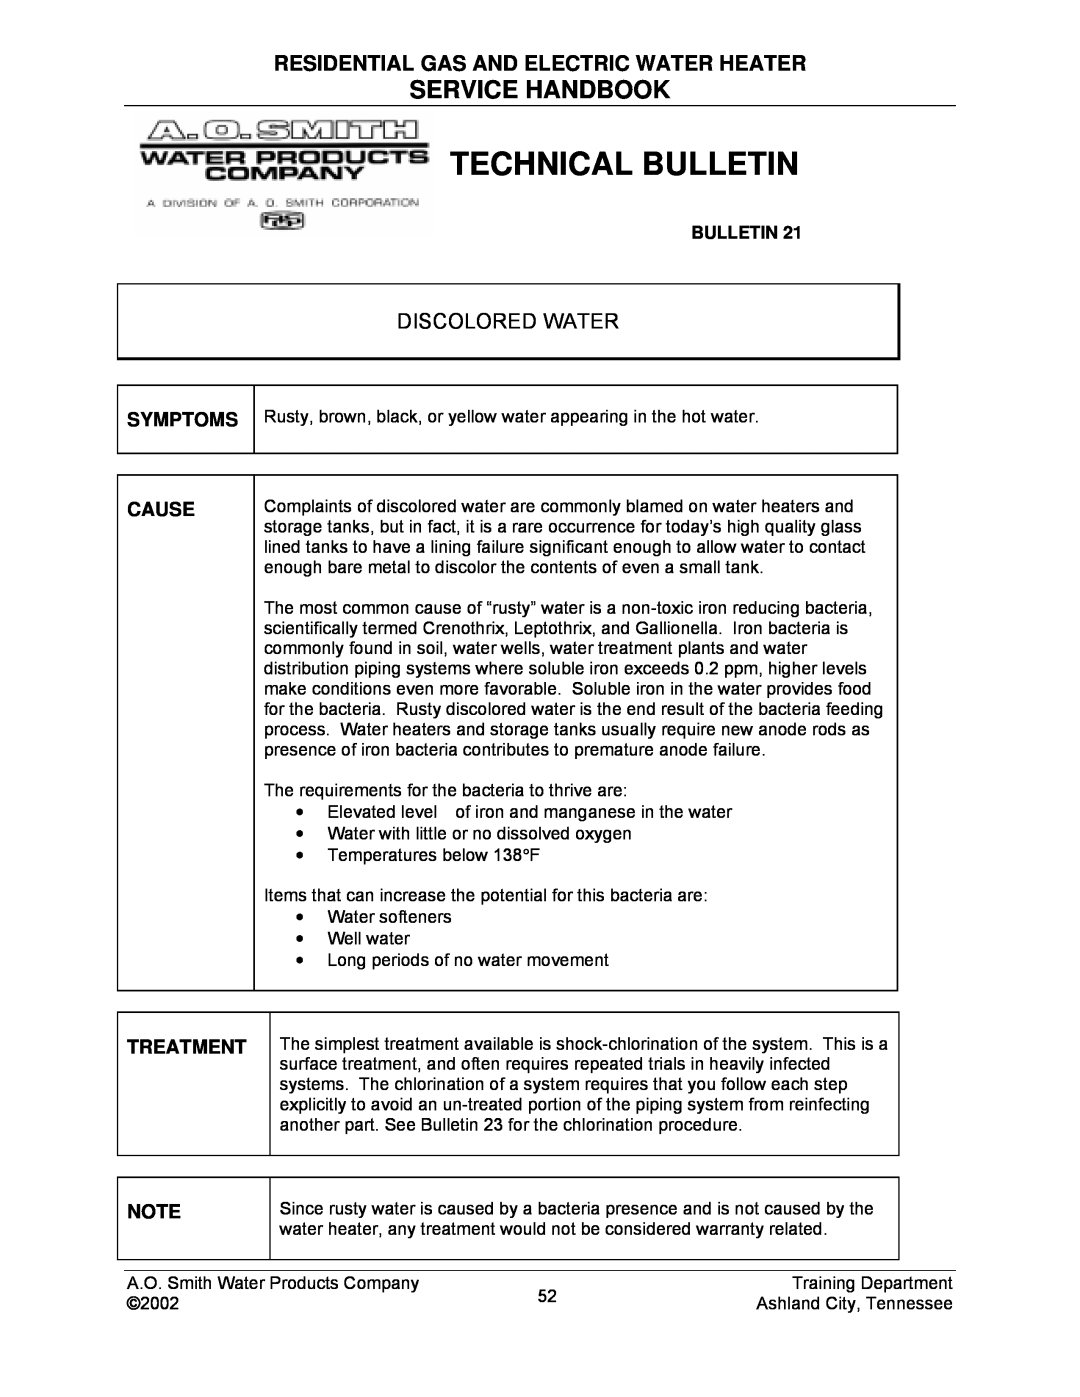 A.O. Smith TC-049-R2 Technical Bulletin, Service Handbook, Residential Gas And Electric Water Heater, Discolored Water 